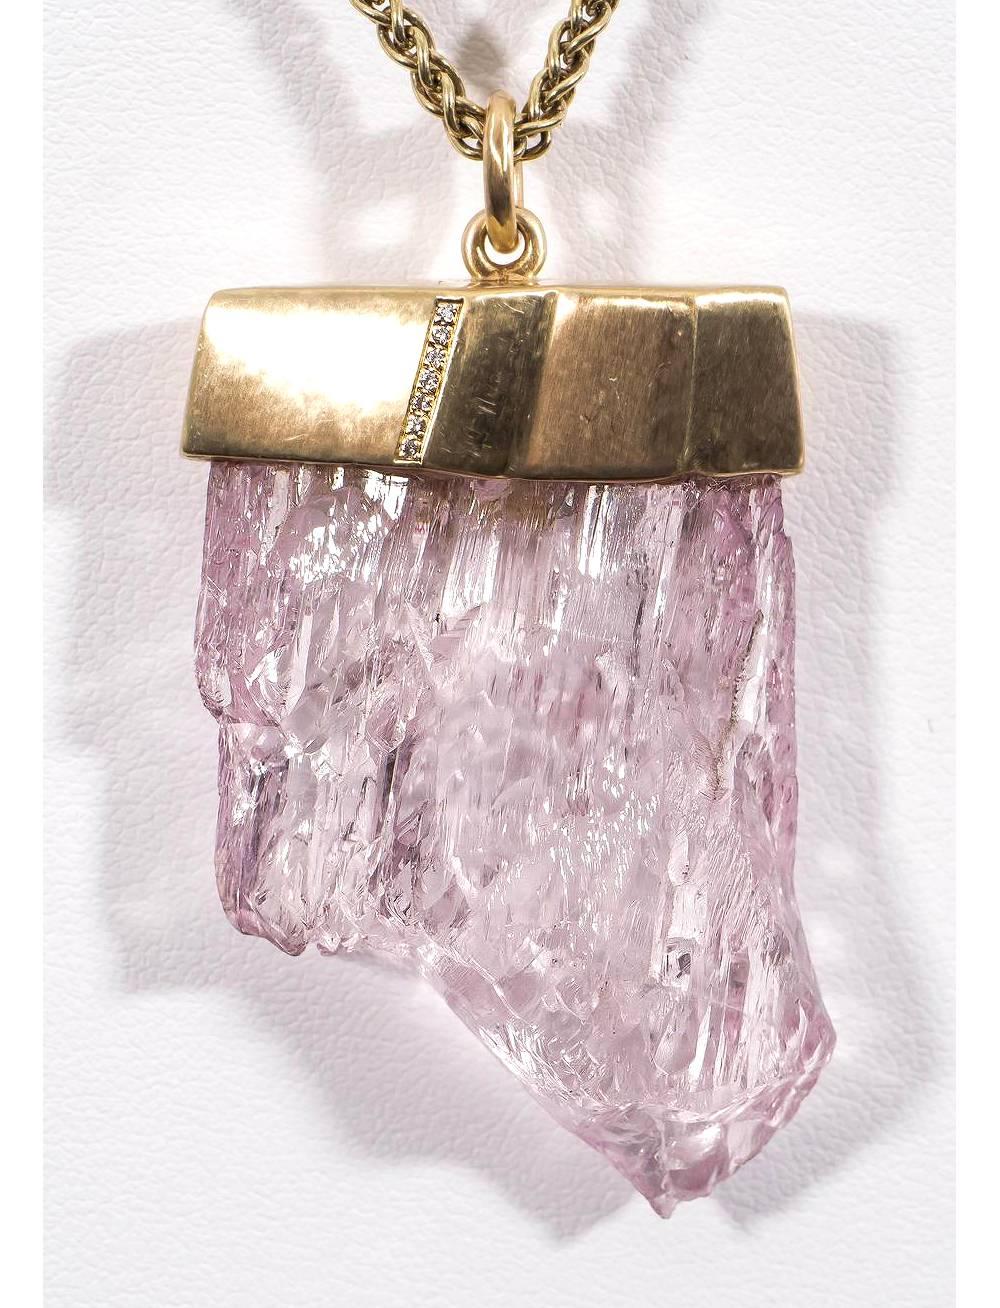 This beautiful, unique pendant features a natural, uncut pink kunzite crystal set in 18K yellow gold with VS-FG white diamonds. Chain not included.

Internationally award winning designer Naomi Sarna creates gem carvings and jewels of unusual